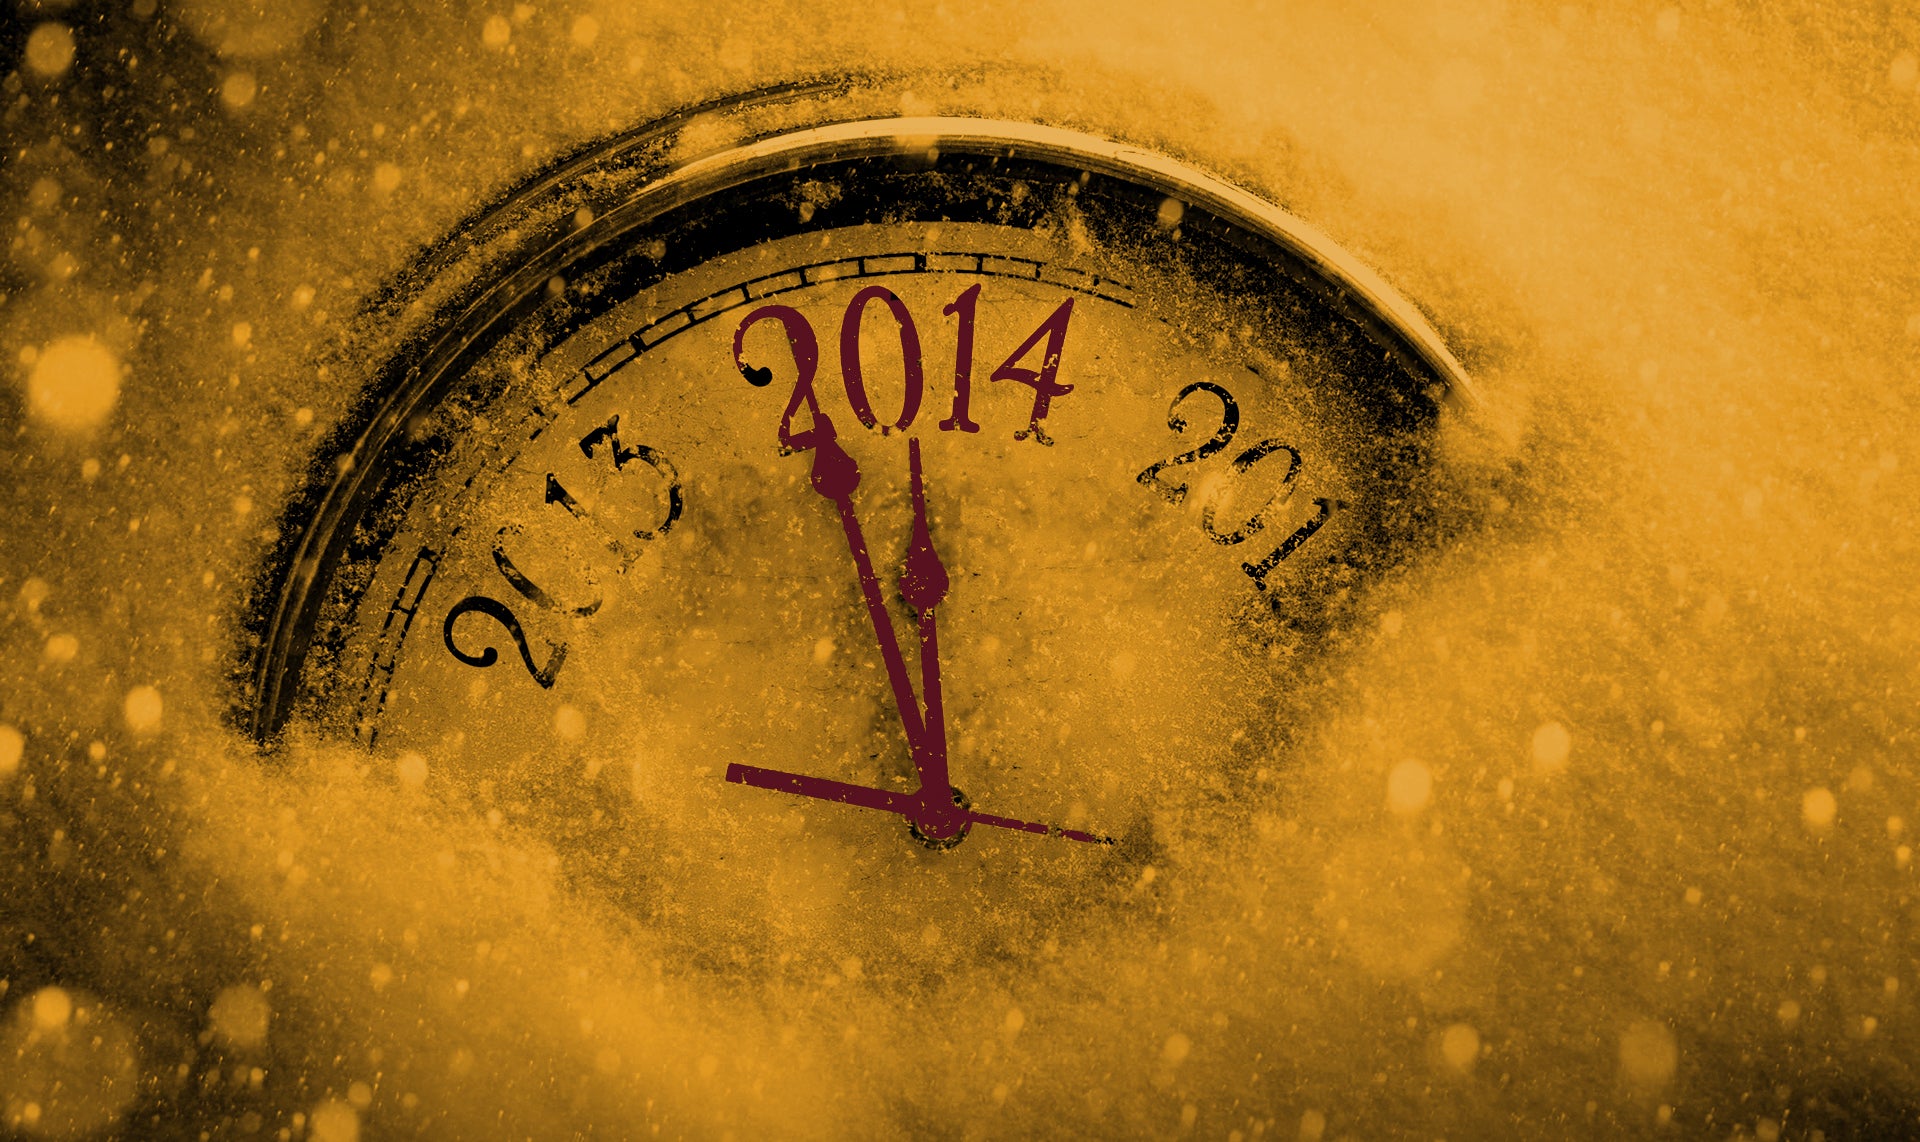 Timeclock closing in on the end of 2014